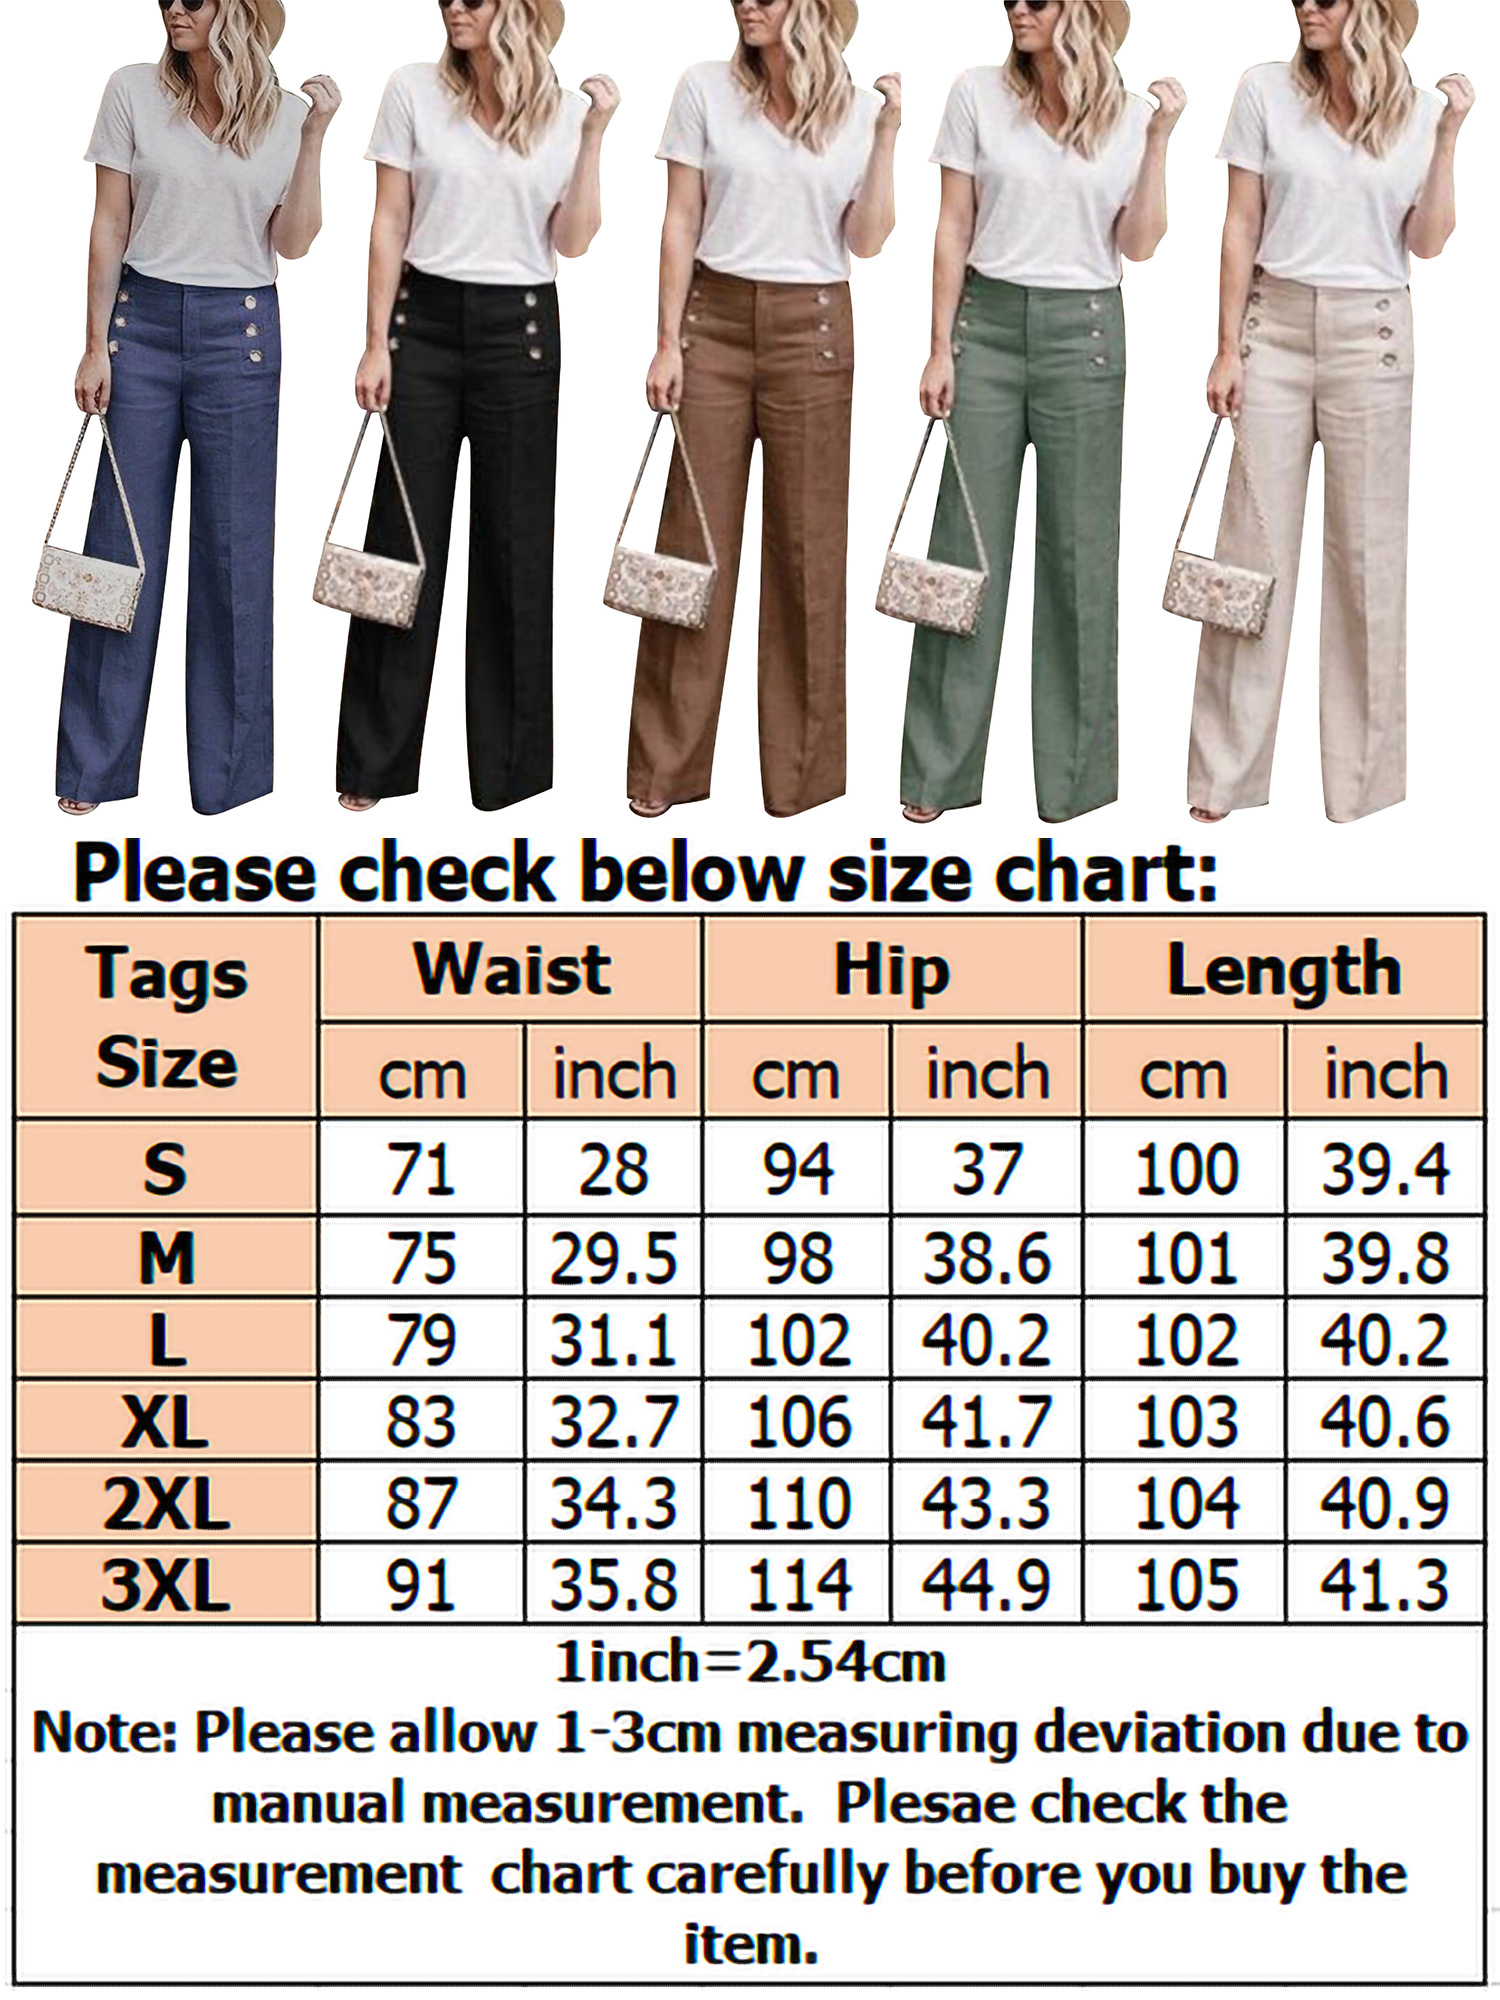 HIMONE Women Casual Solid Button Palazzo Pants Loose Wide Leg Pants Trousers High Waist Flare Pants OL Business Pants - image 2 of 4